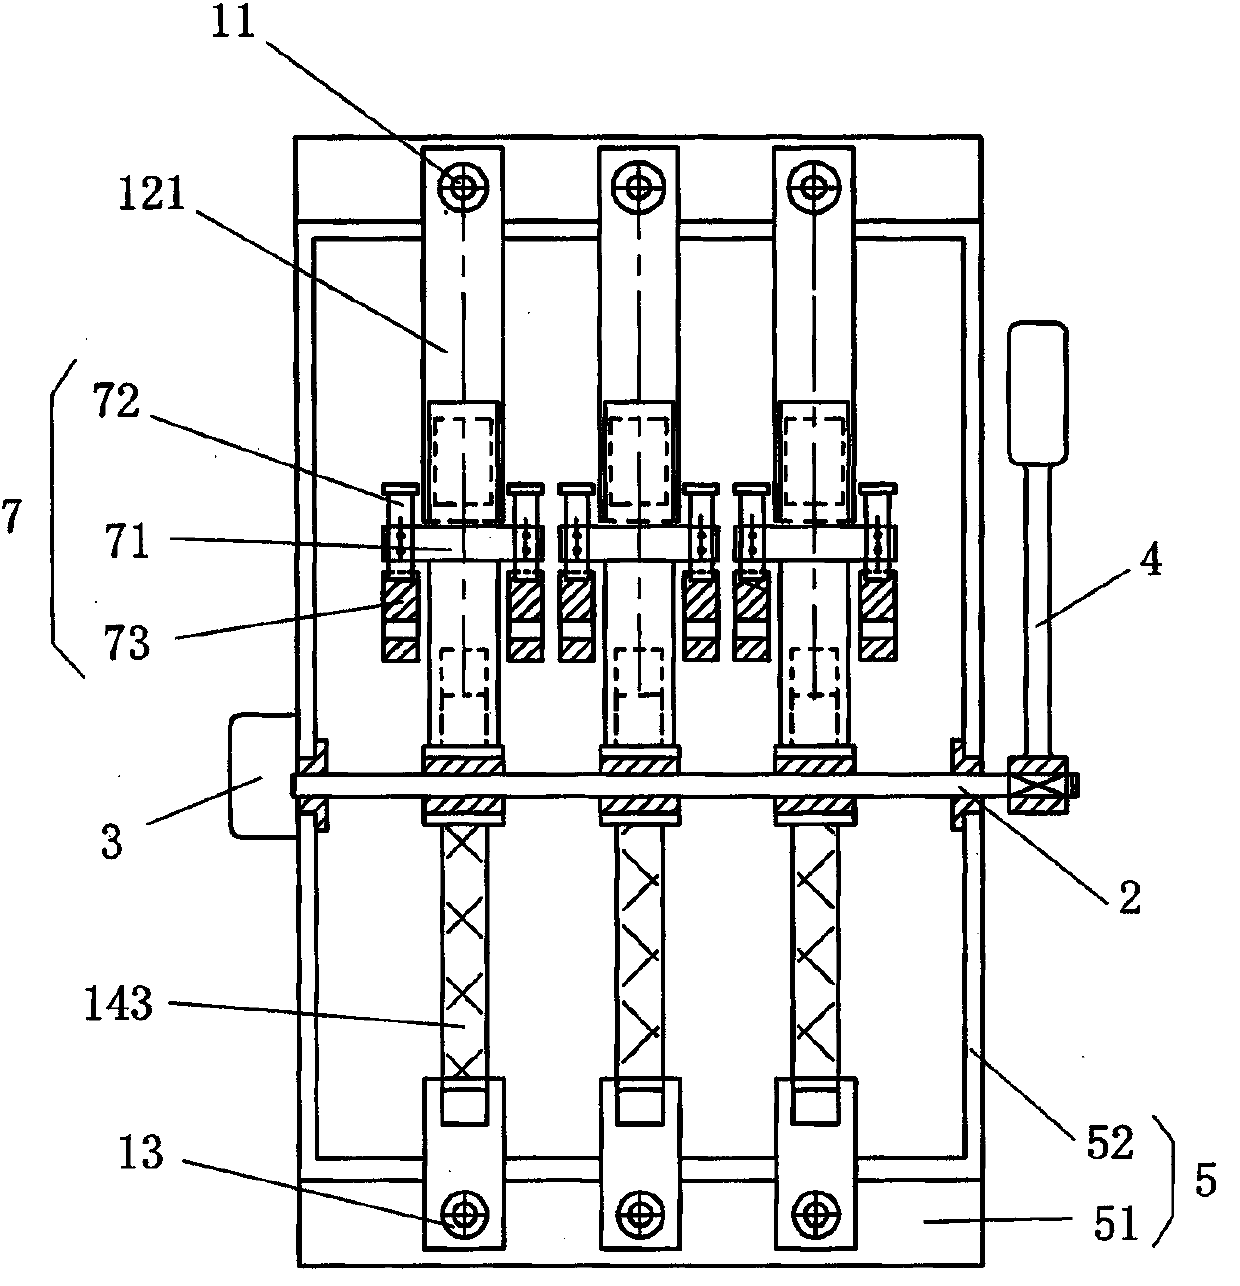 Sliding-type switching device used for main-connection-line short circuit precheck of low-voltage circuit breaker